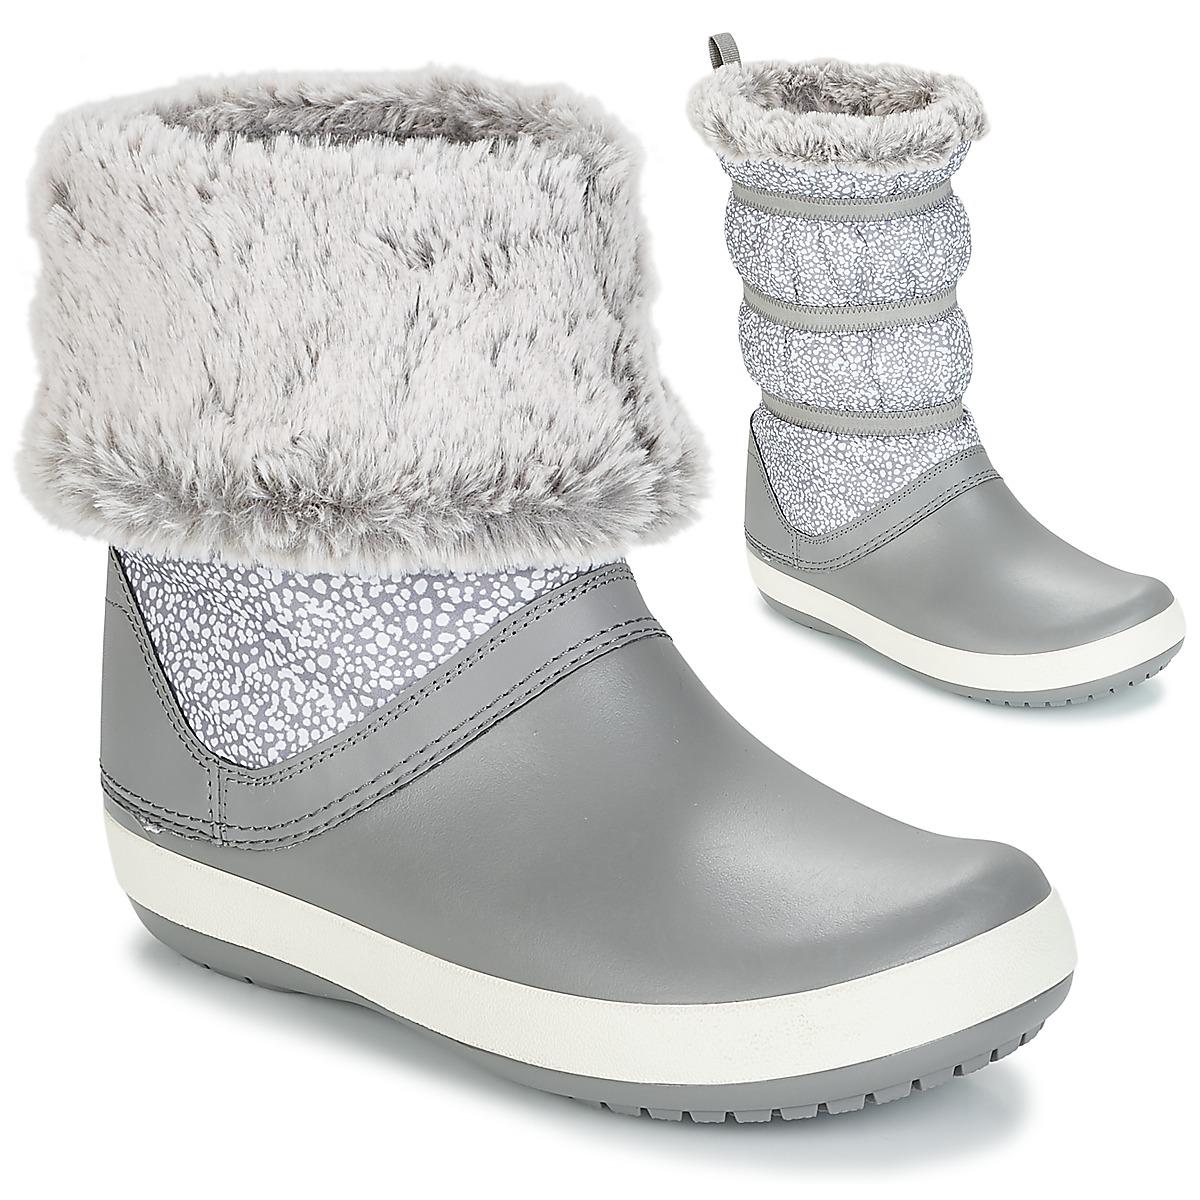  Crocs   Synthetic Crocband Winter Boot  W Women s  Snow Boots  